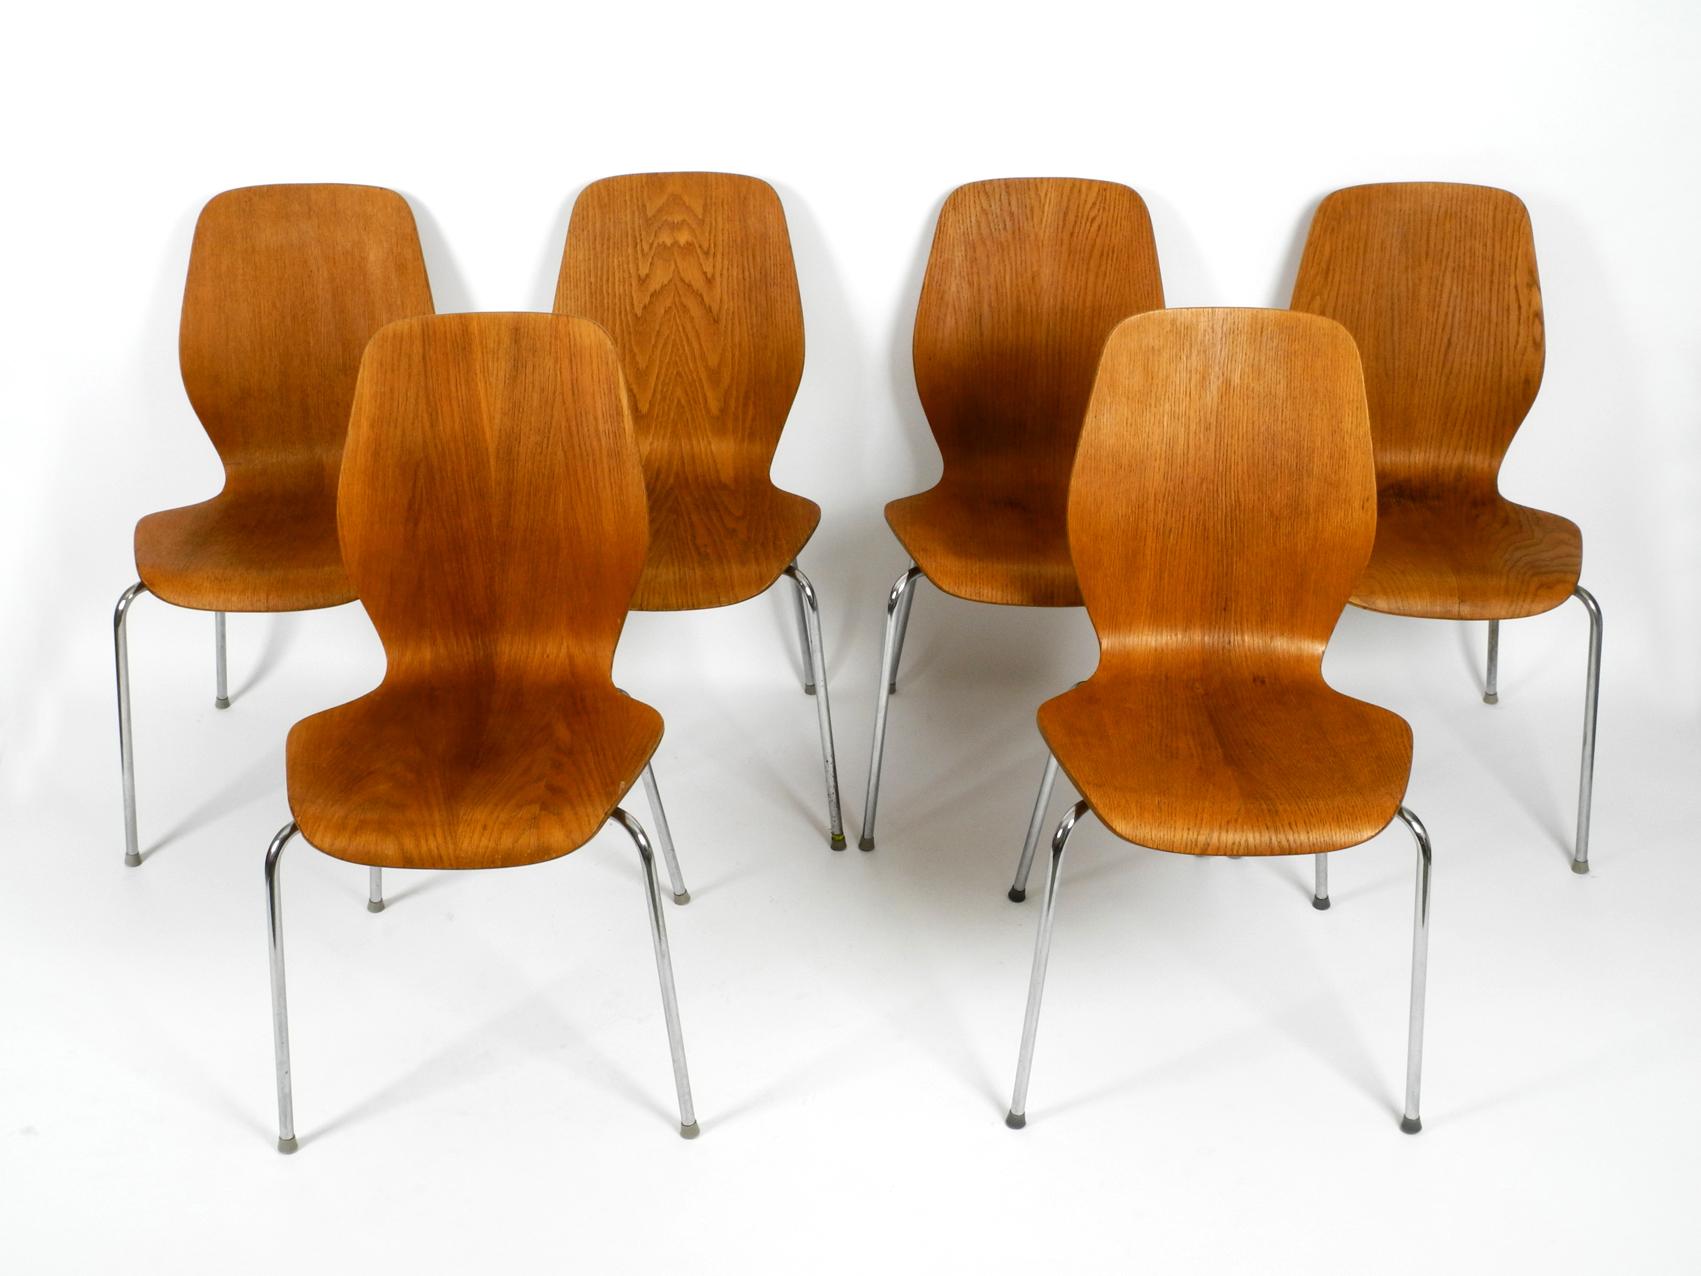 Very rare set of 6 plywood chairs by Herbert Hirche for Jofa Stalmobler. 
Made in Denmark. Beautiful Scandinavian design with beautiful wood grain. 
Massively built and very comfortable. Stackable. Chrome-plated tubular steel frame.
No damages